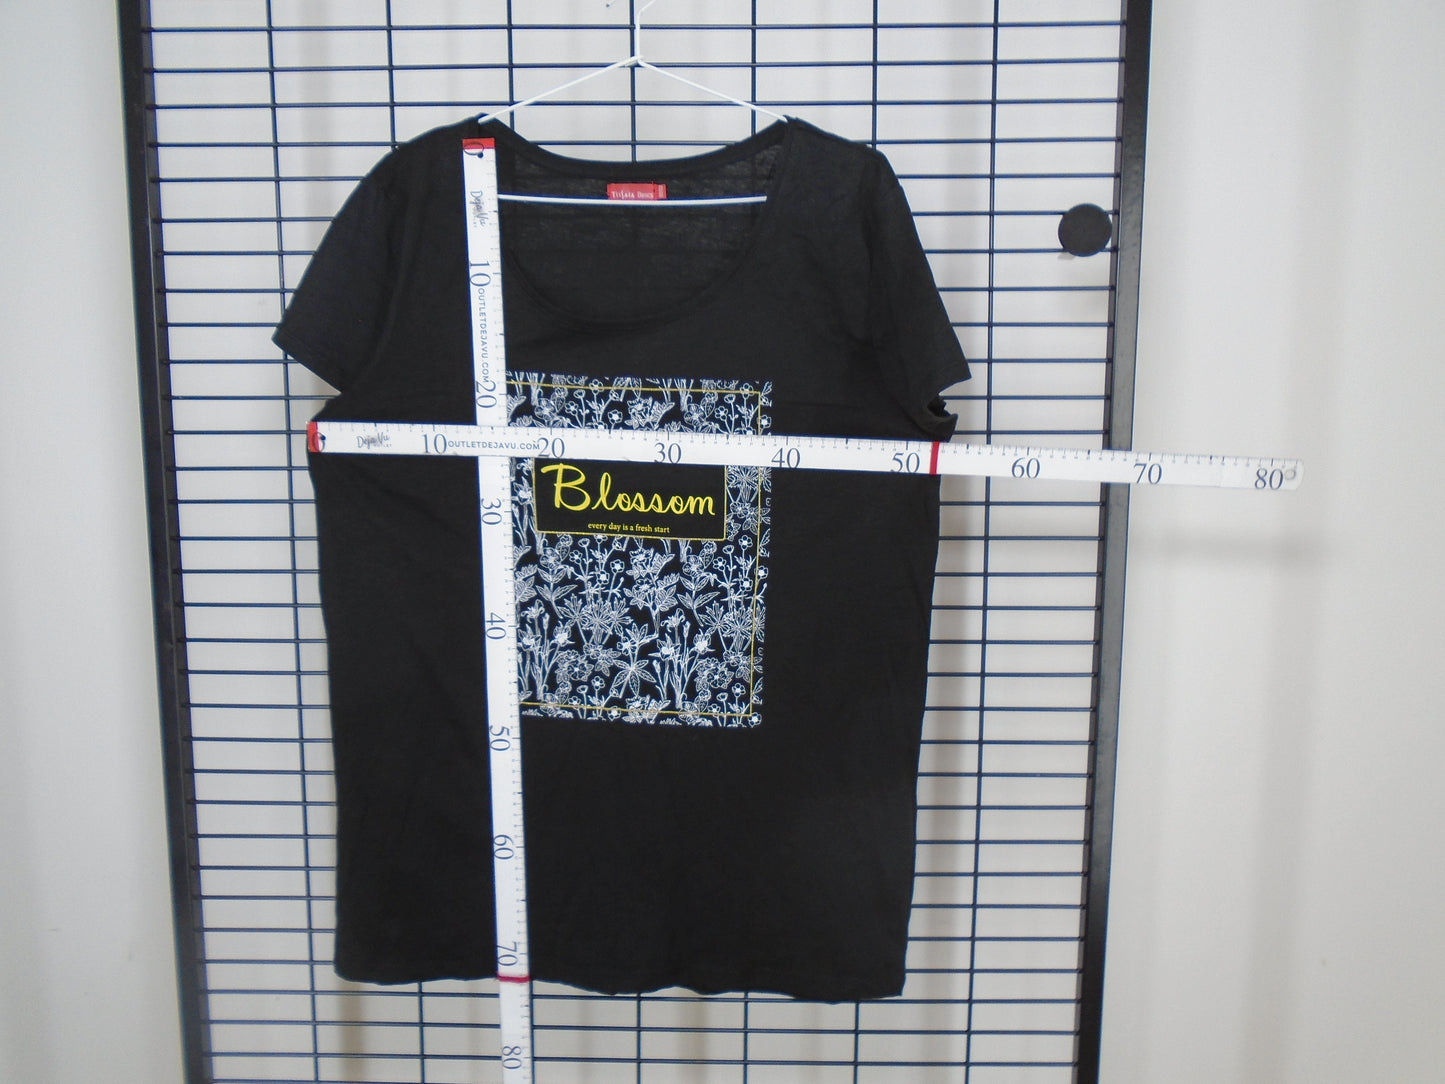 Men's T-Shirt Tissaia. Color: Black. Size: L. Condition: Used.(Very good condition). | 11920775